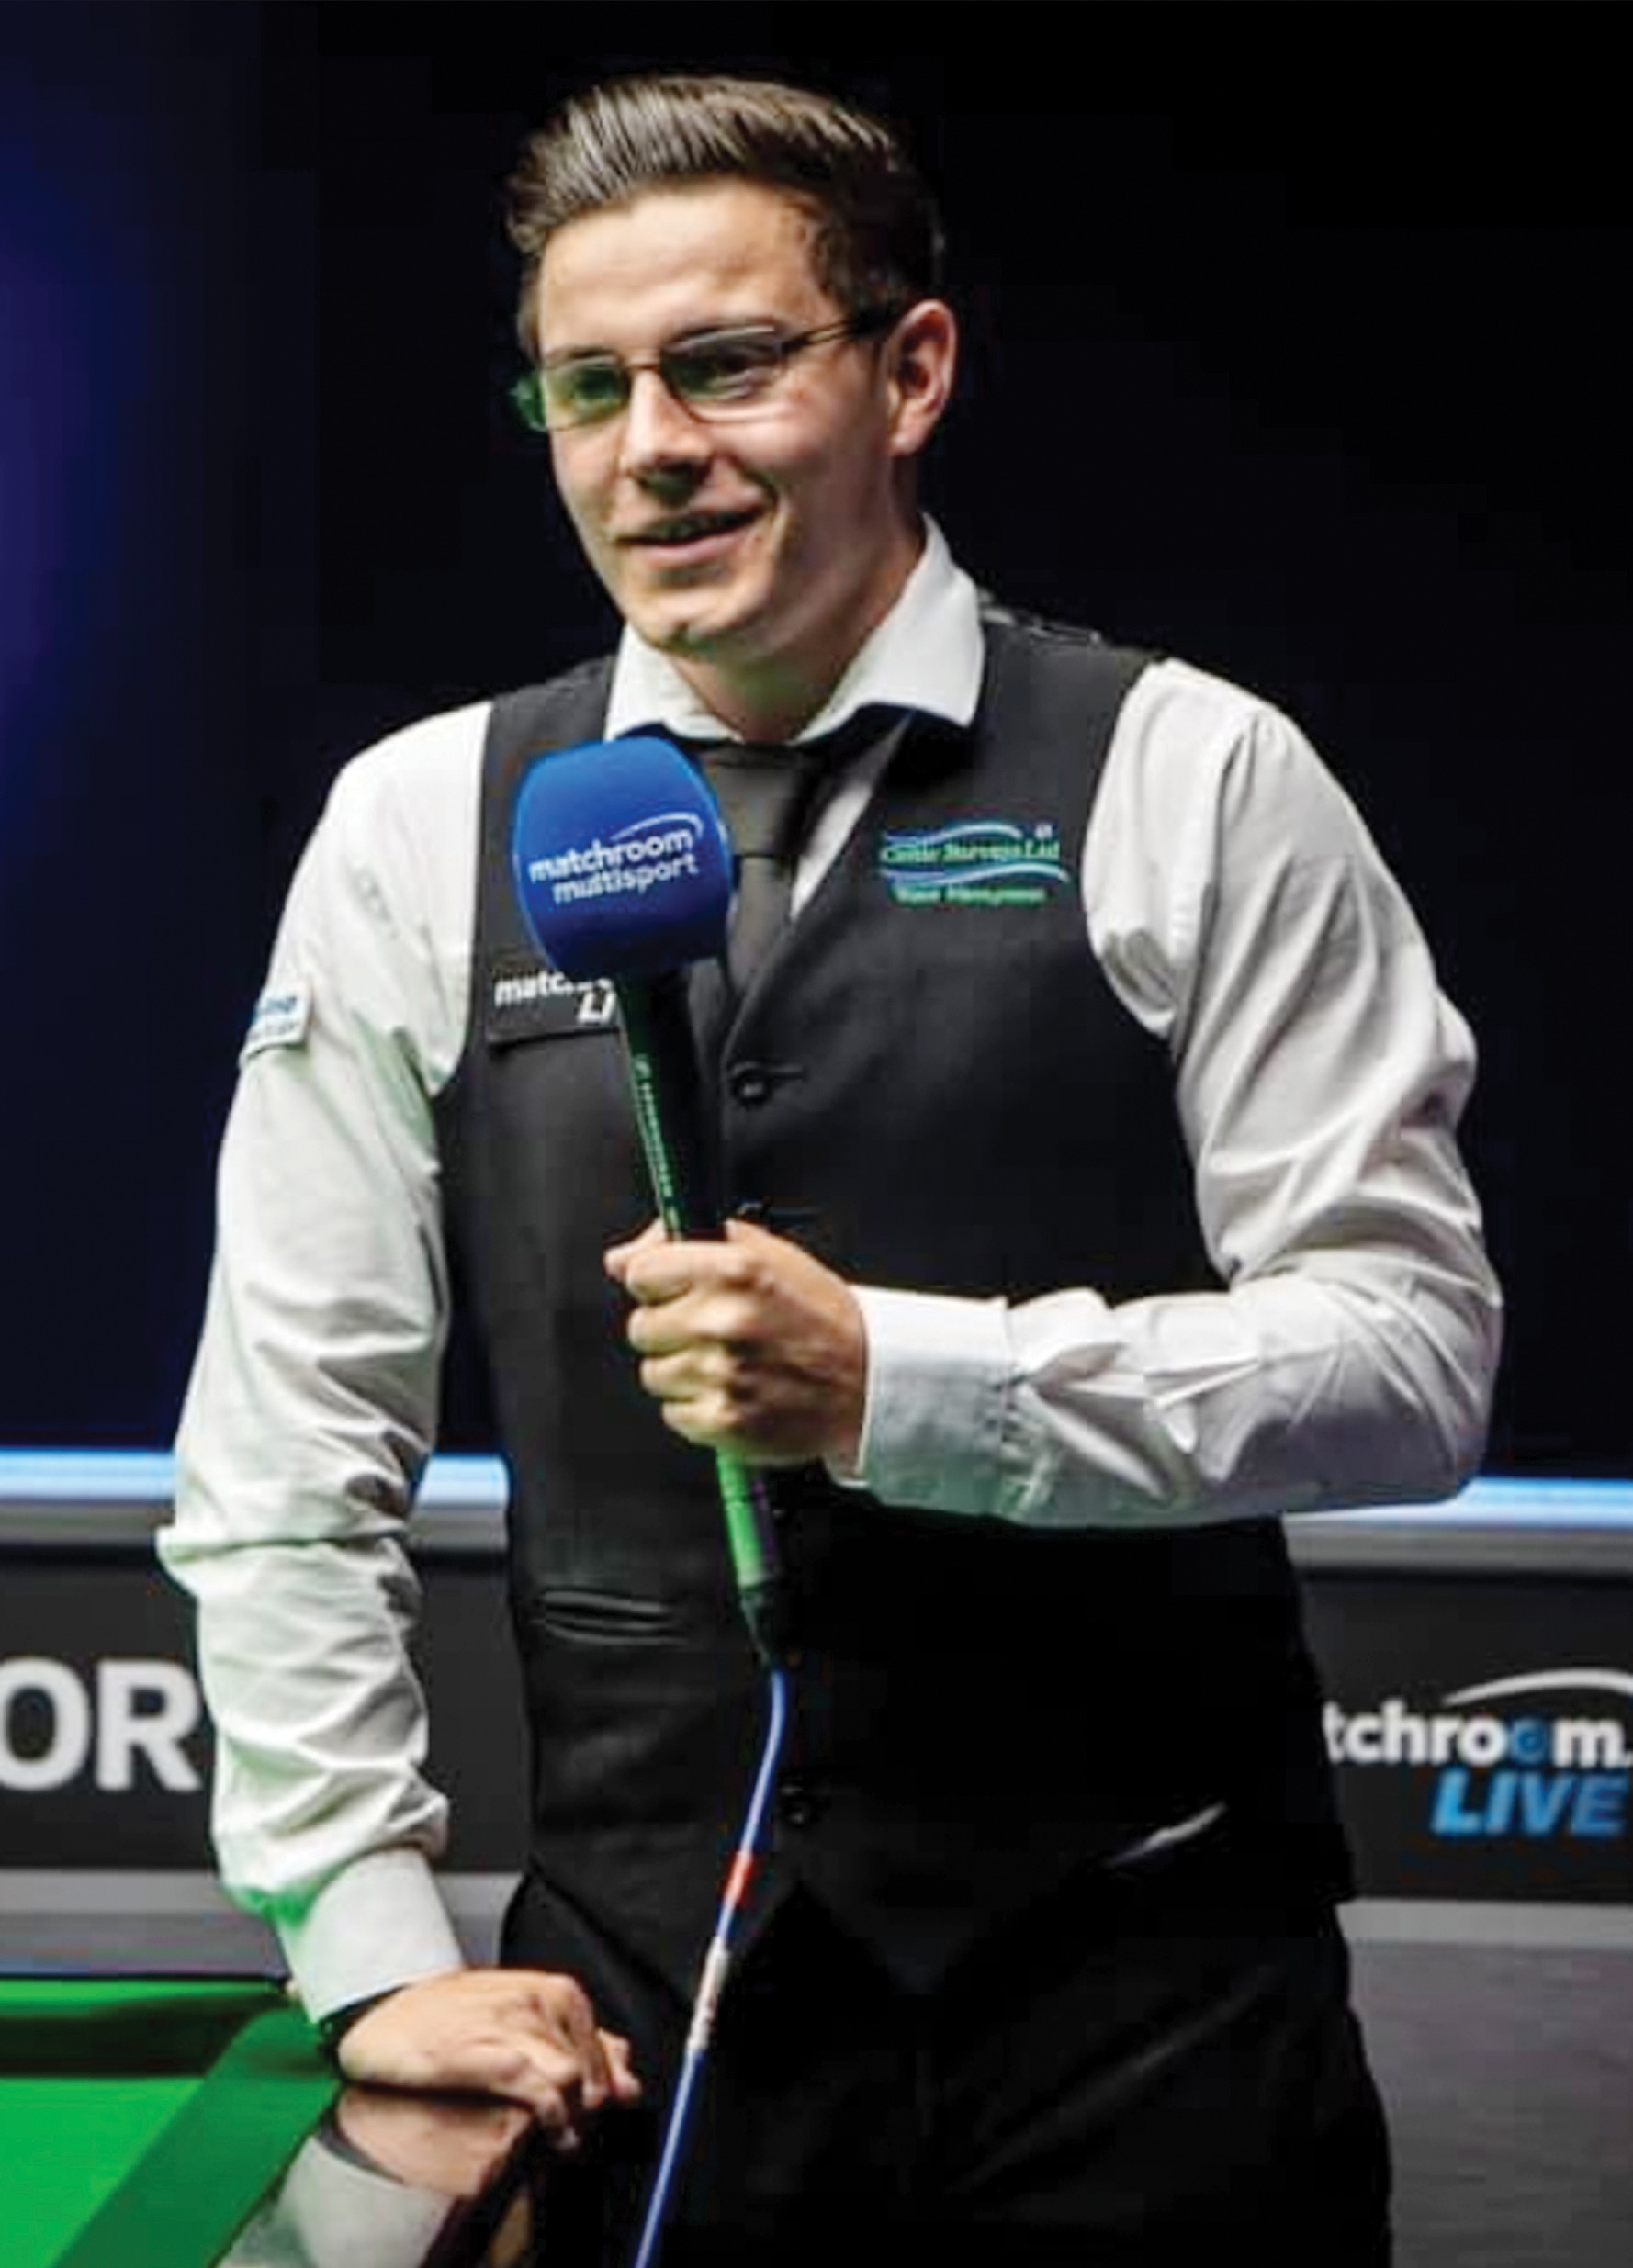 Snooker man Ashley Carty bows out of Championship League tournament after good run